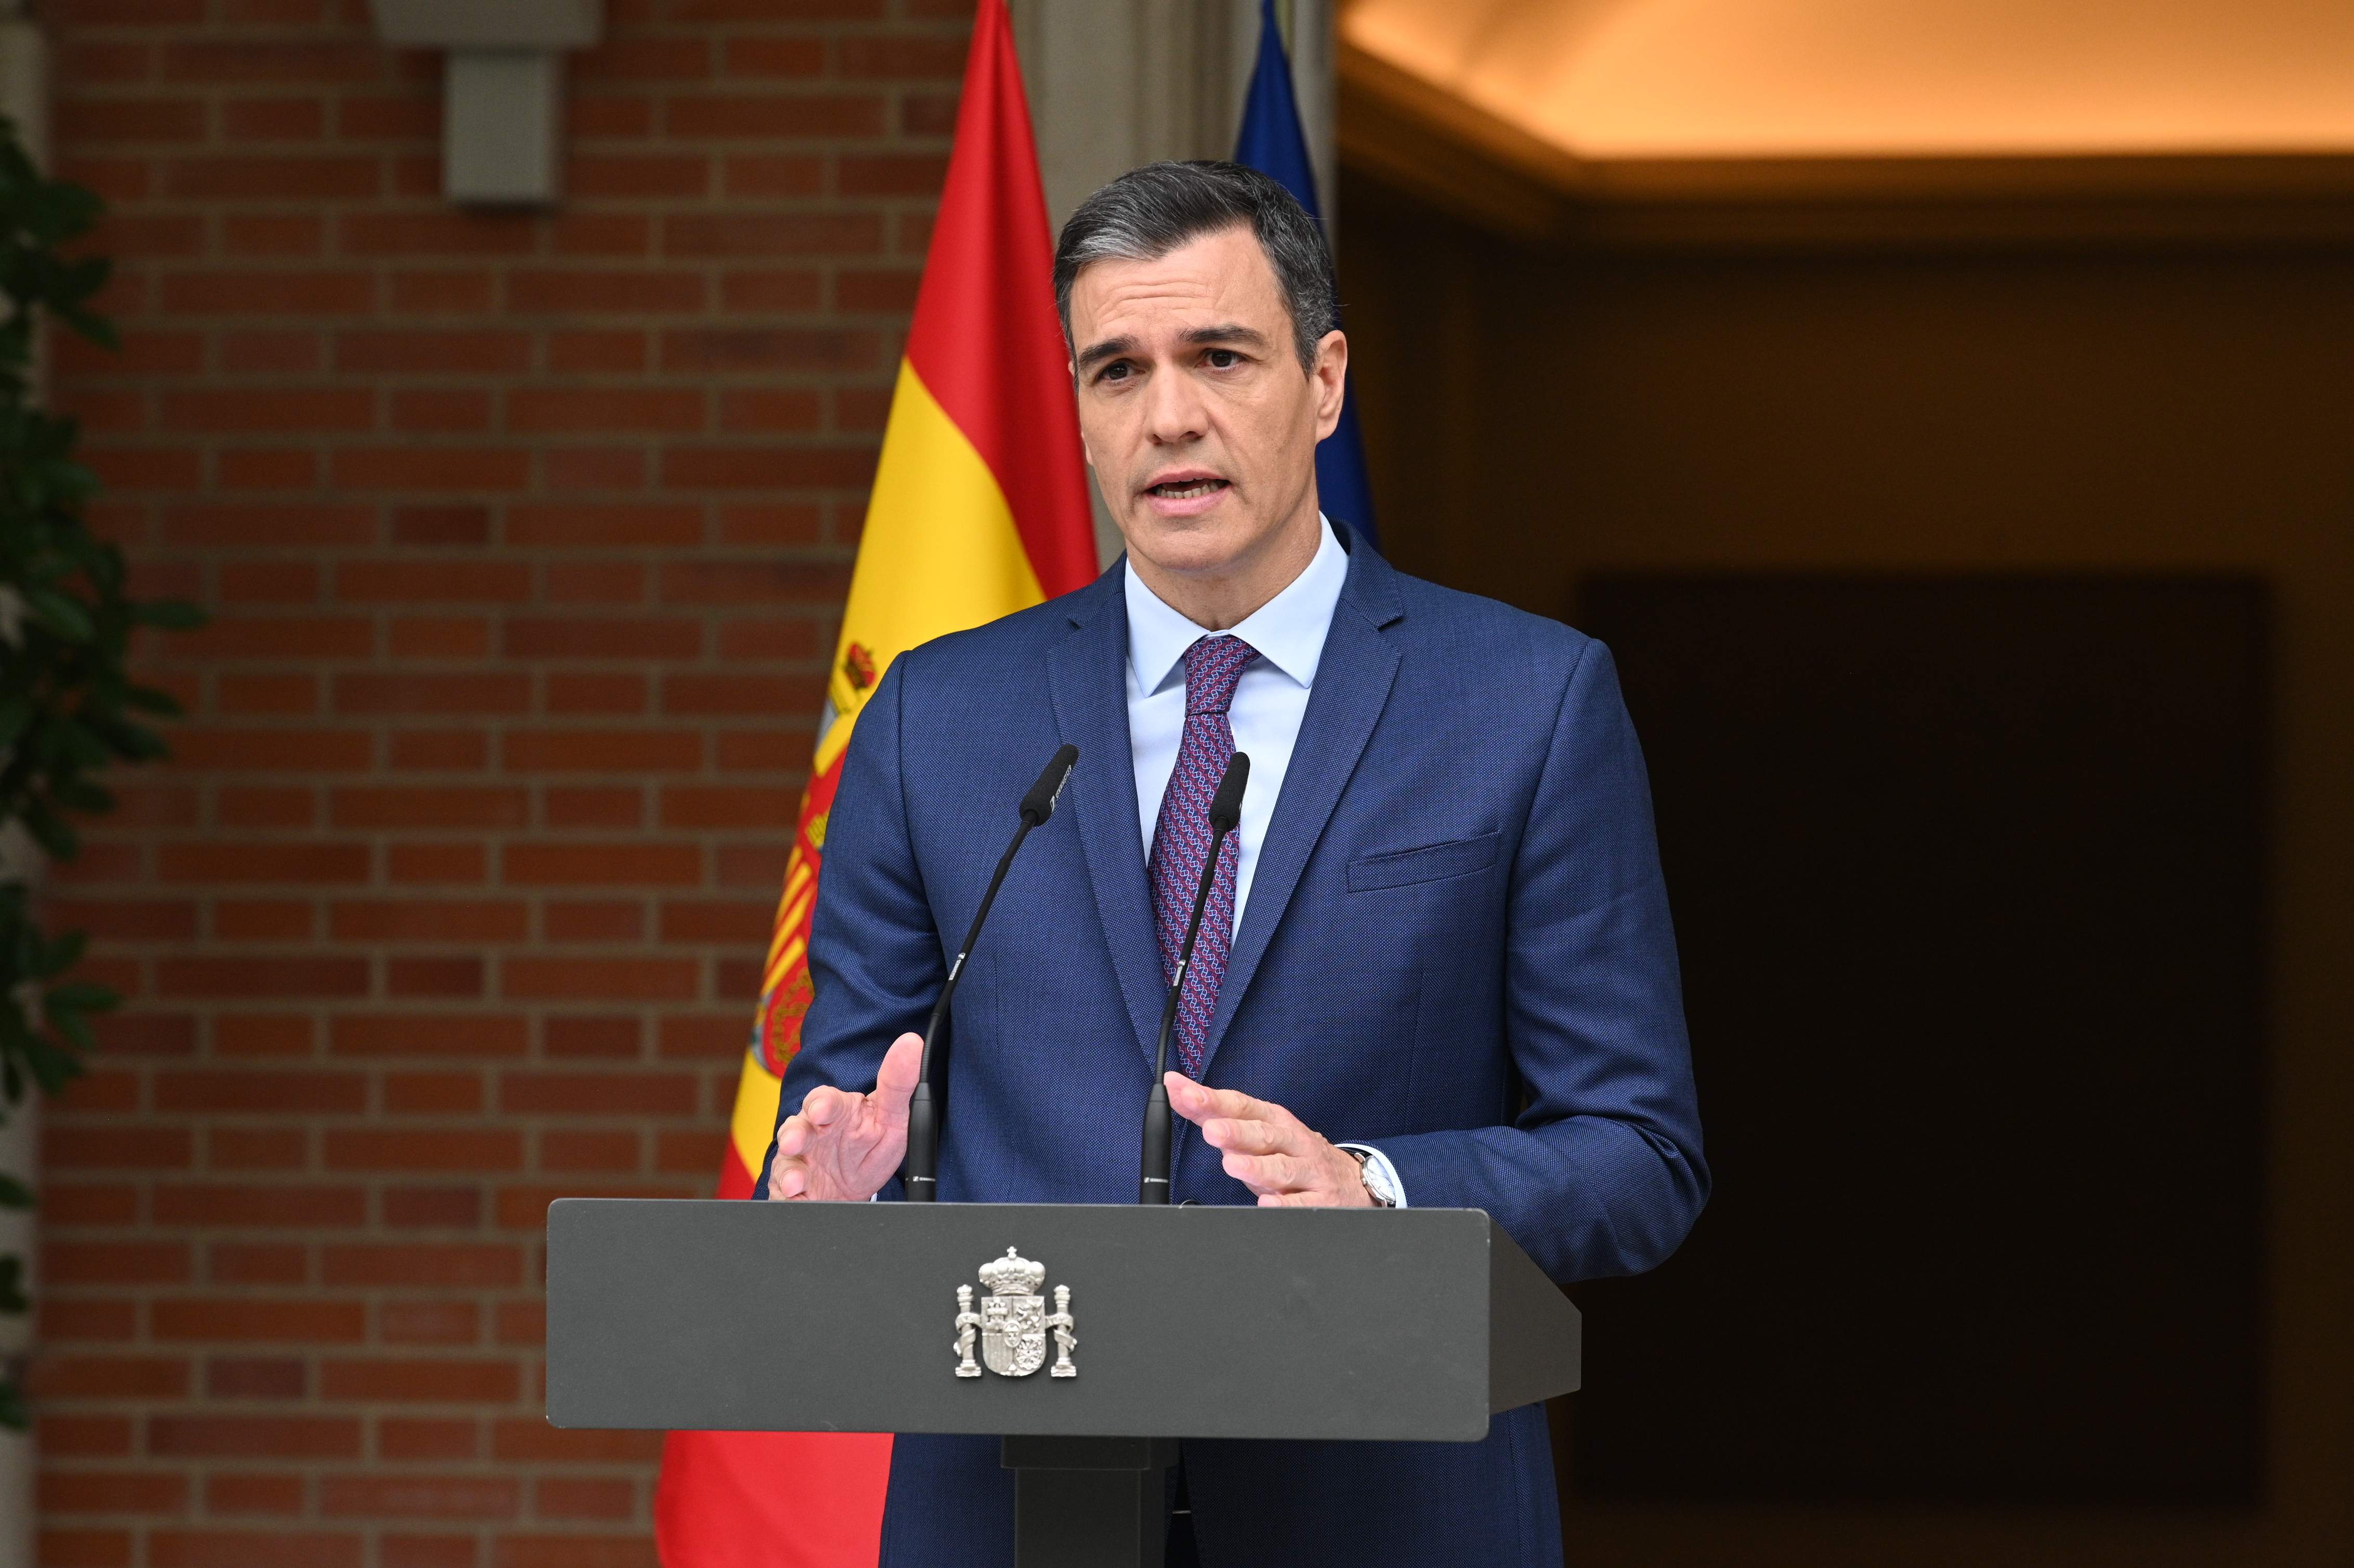 Pedro Sánchez announces that he is continuing as Spanish prime minister